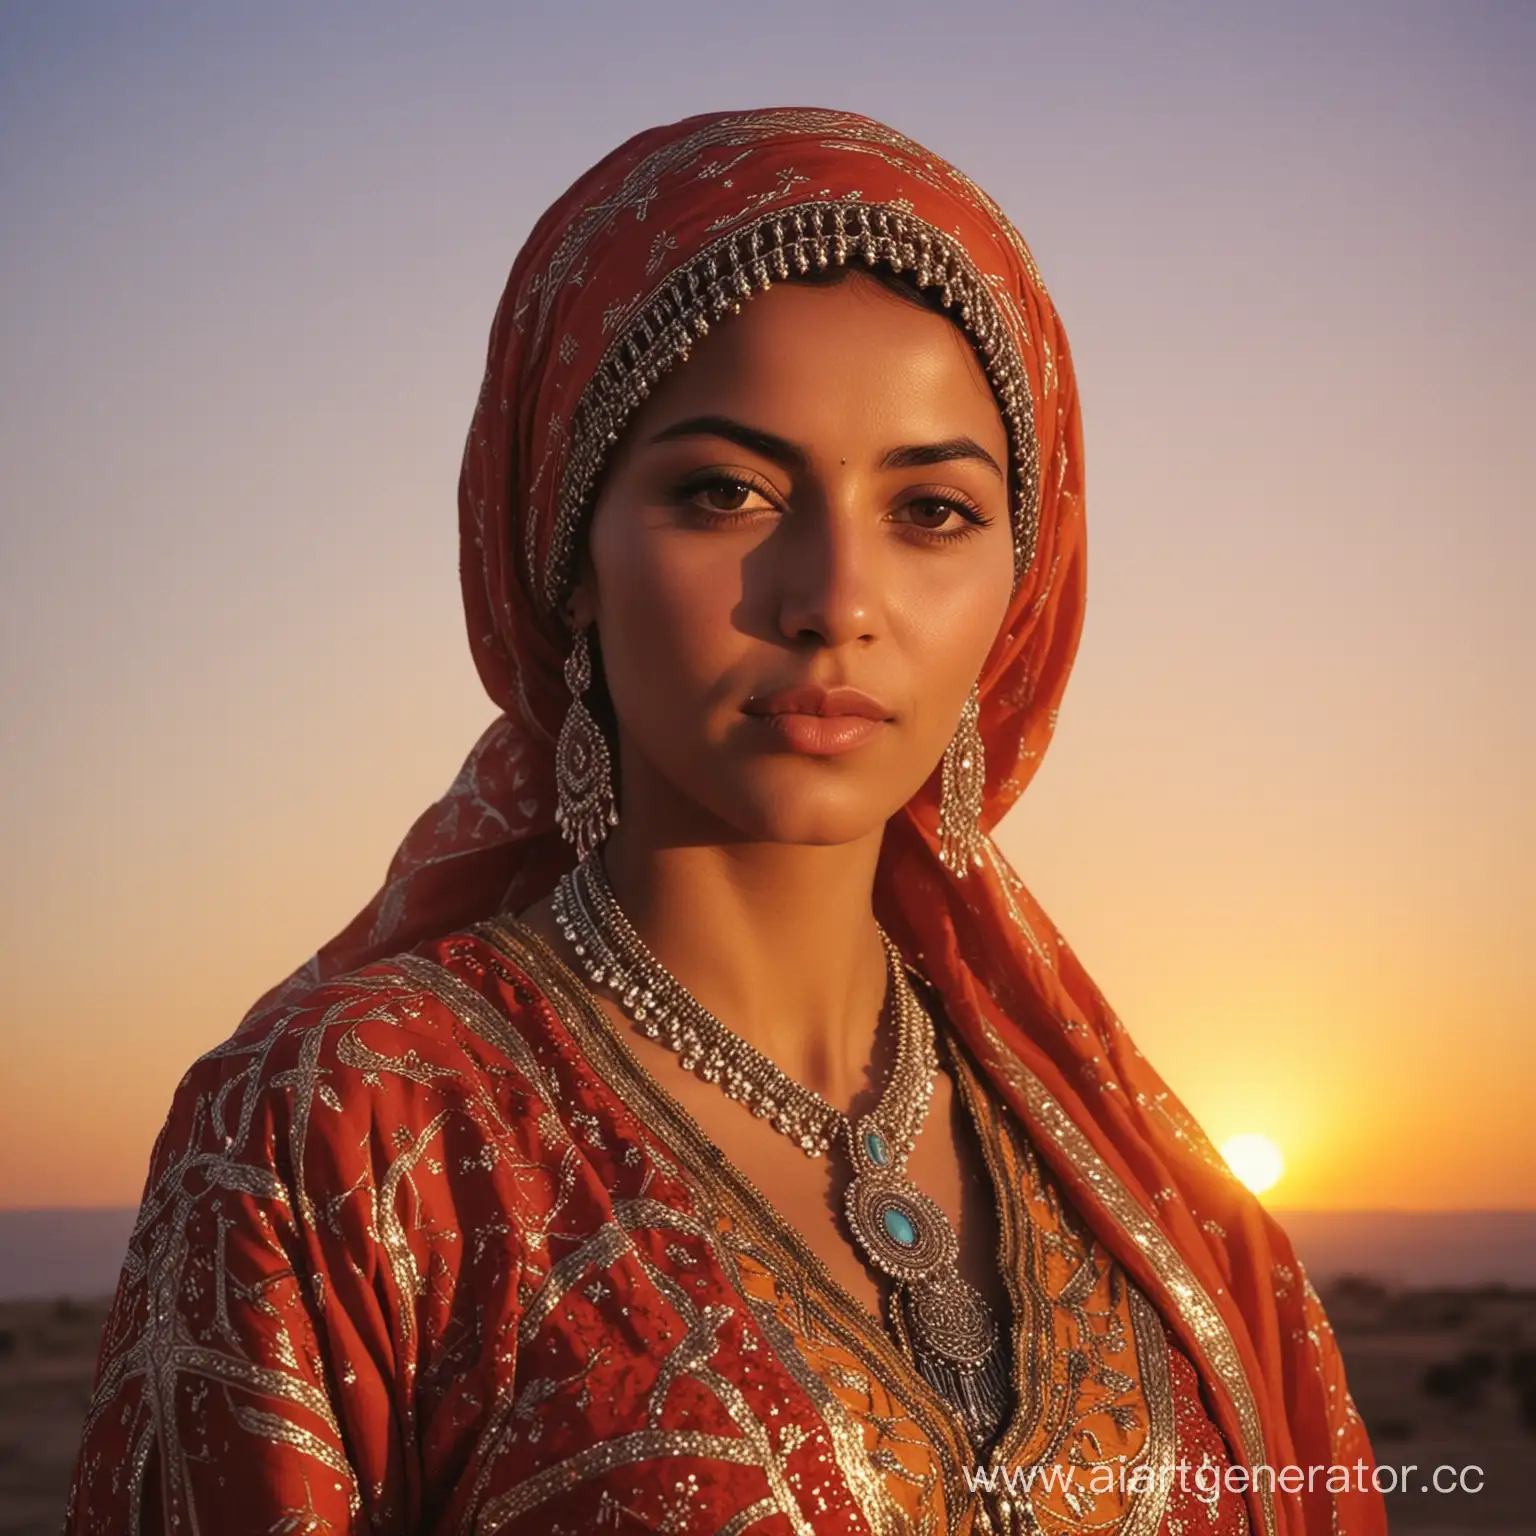 A woman from Morocco in the sixties in traditional dress at sunset